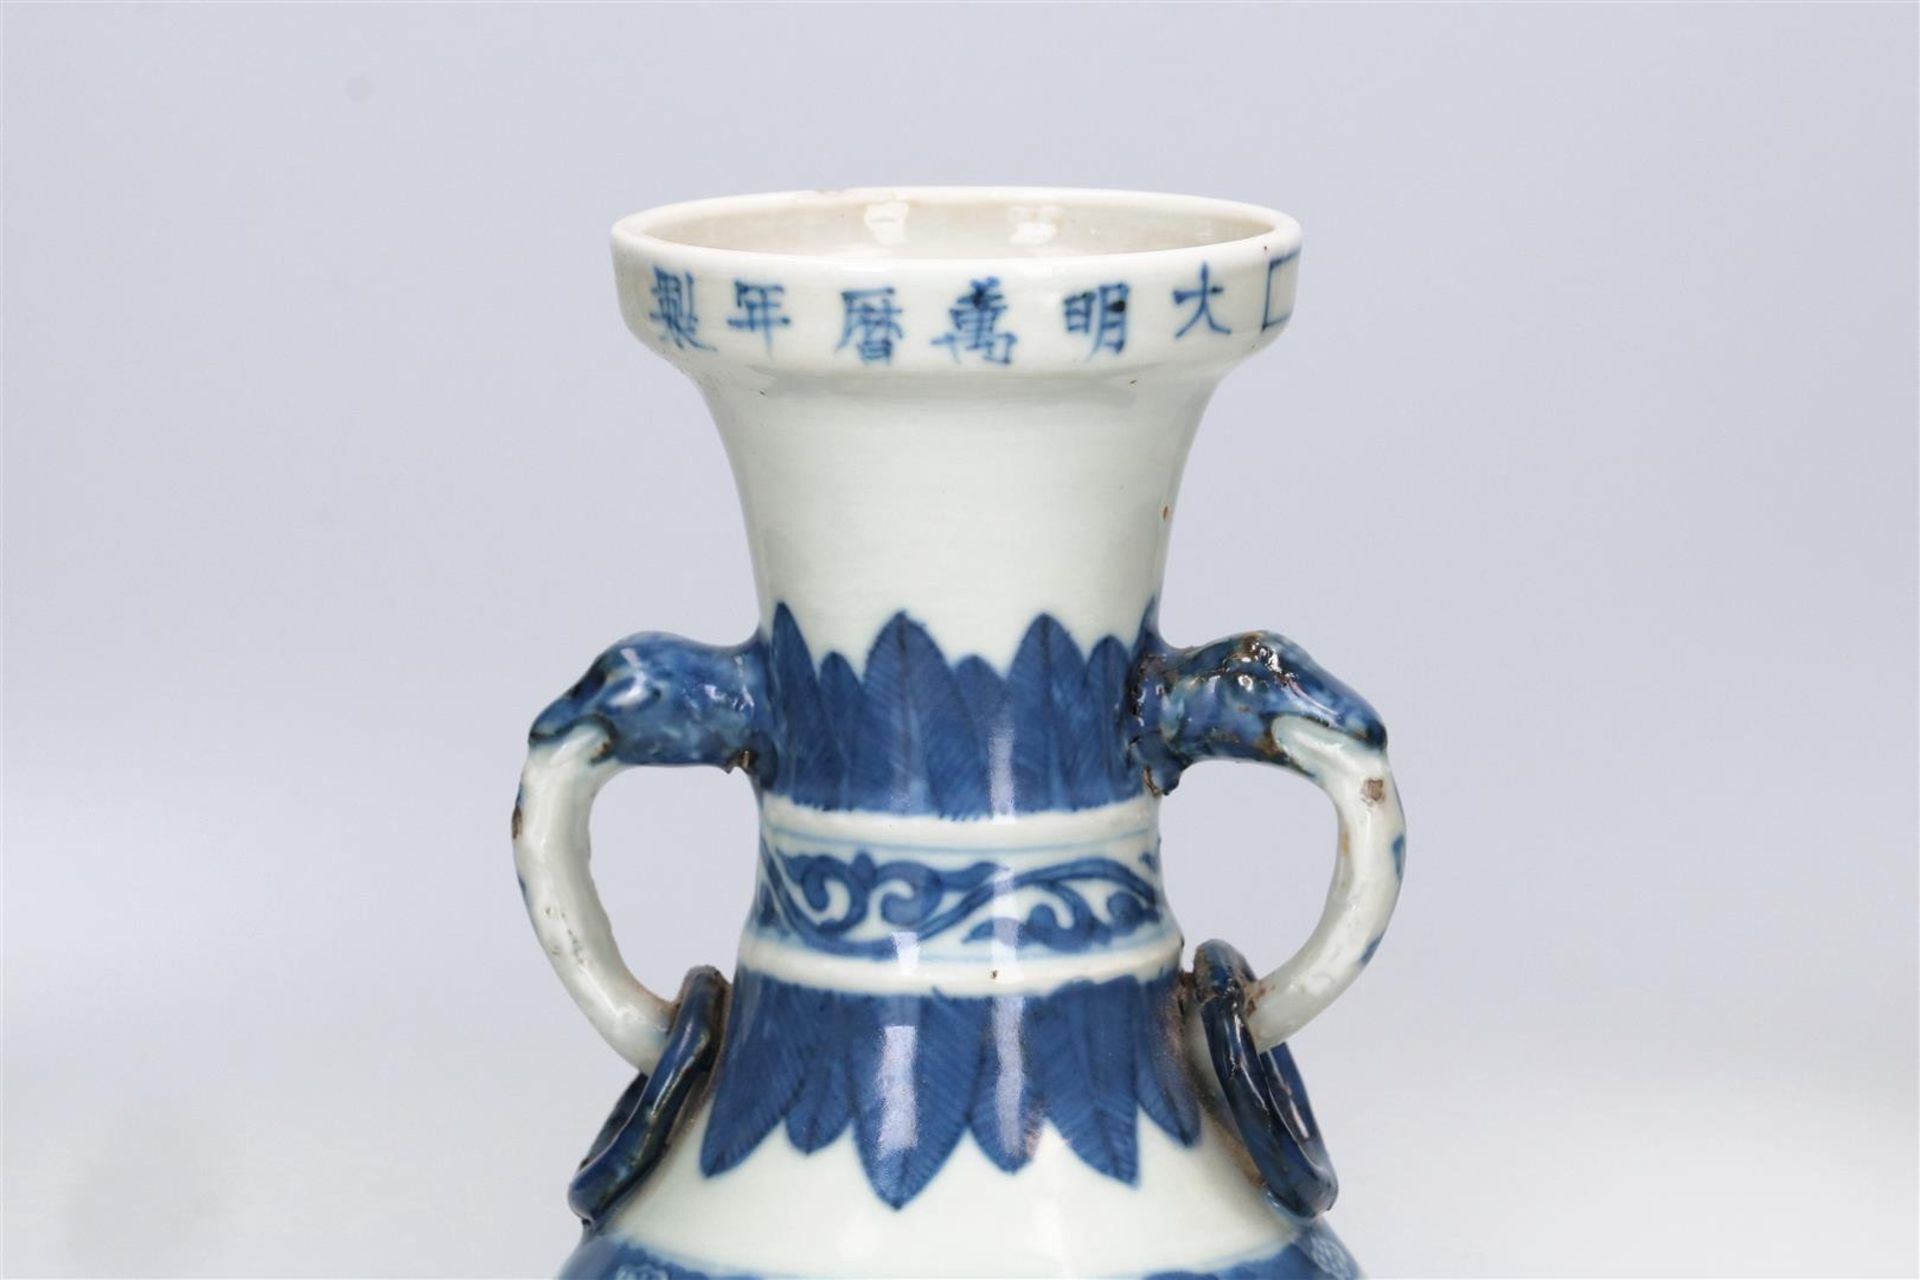 A blue and white porcelain vase, with two handles with rings in the shape of animals and a - Image 5 of 7